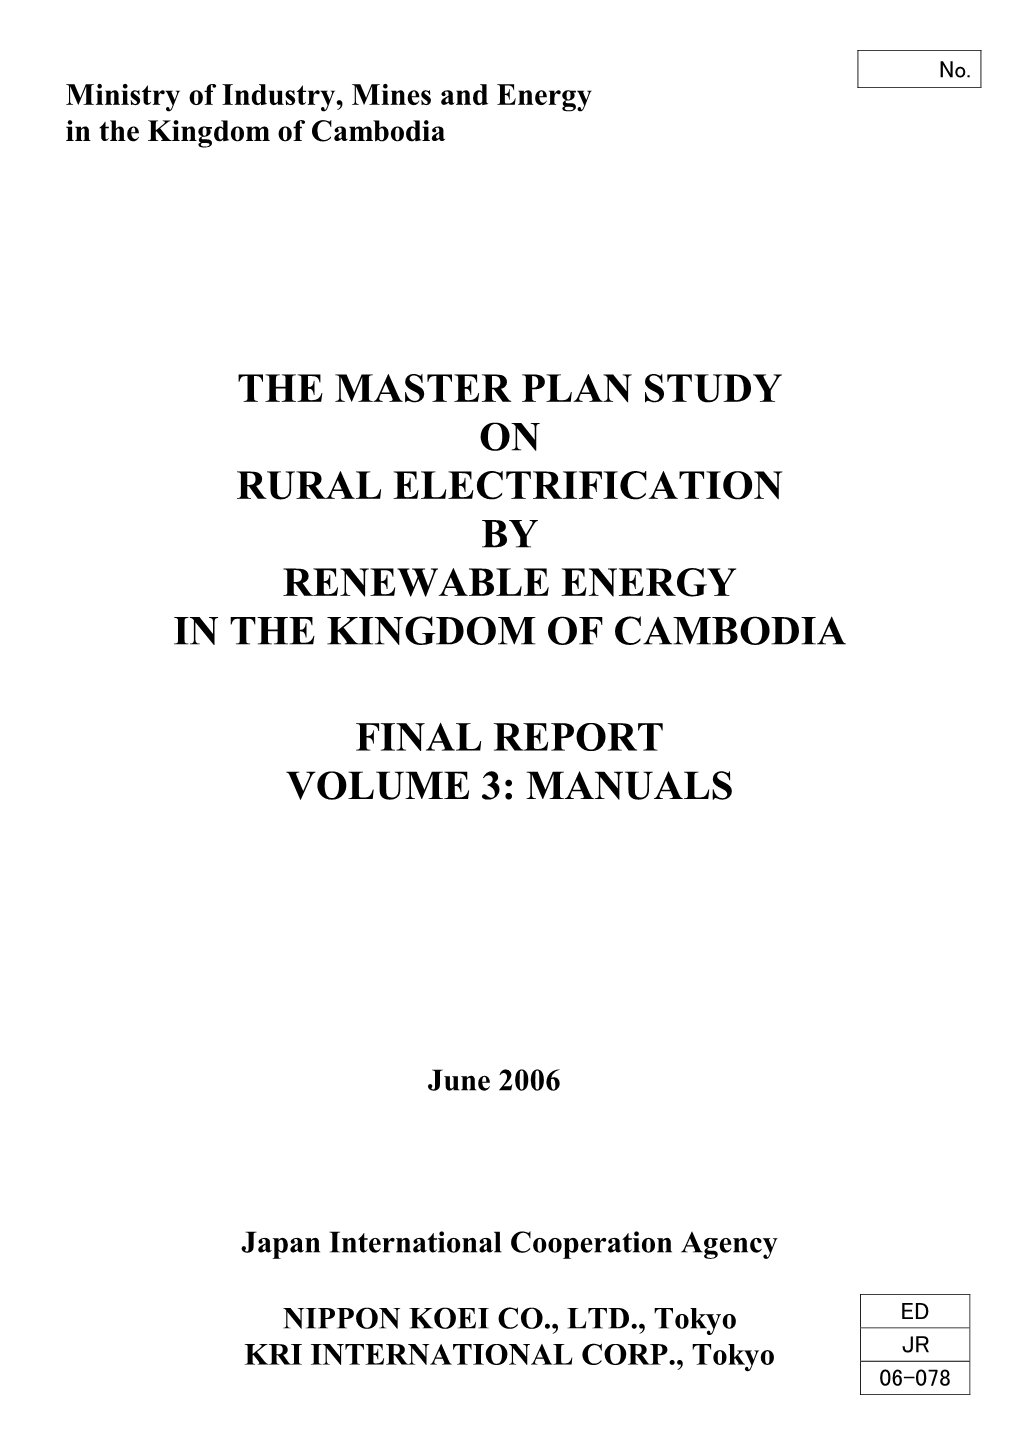 The Master Plan Study on Rural Electrification by Renewable Energy in the Kingdom of Cambodia Final Report Manuals